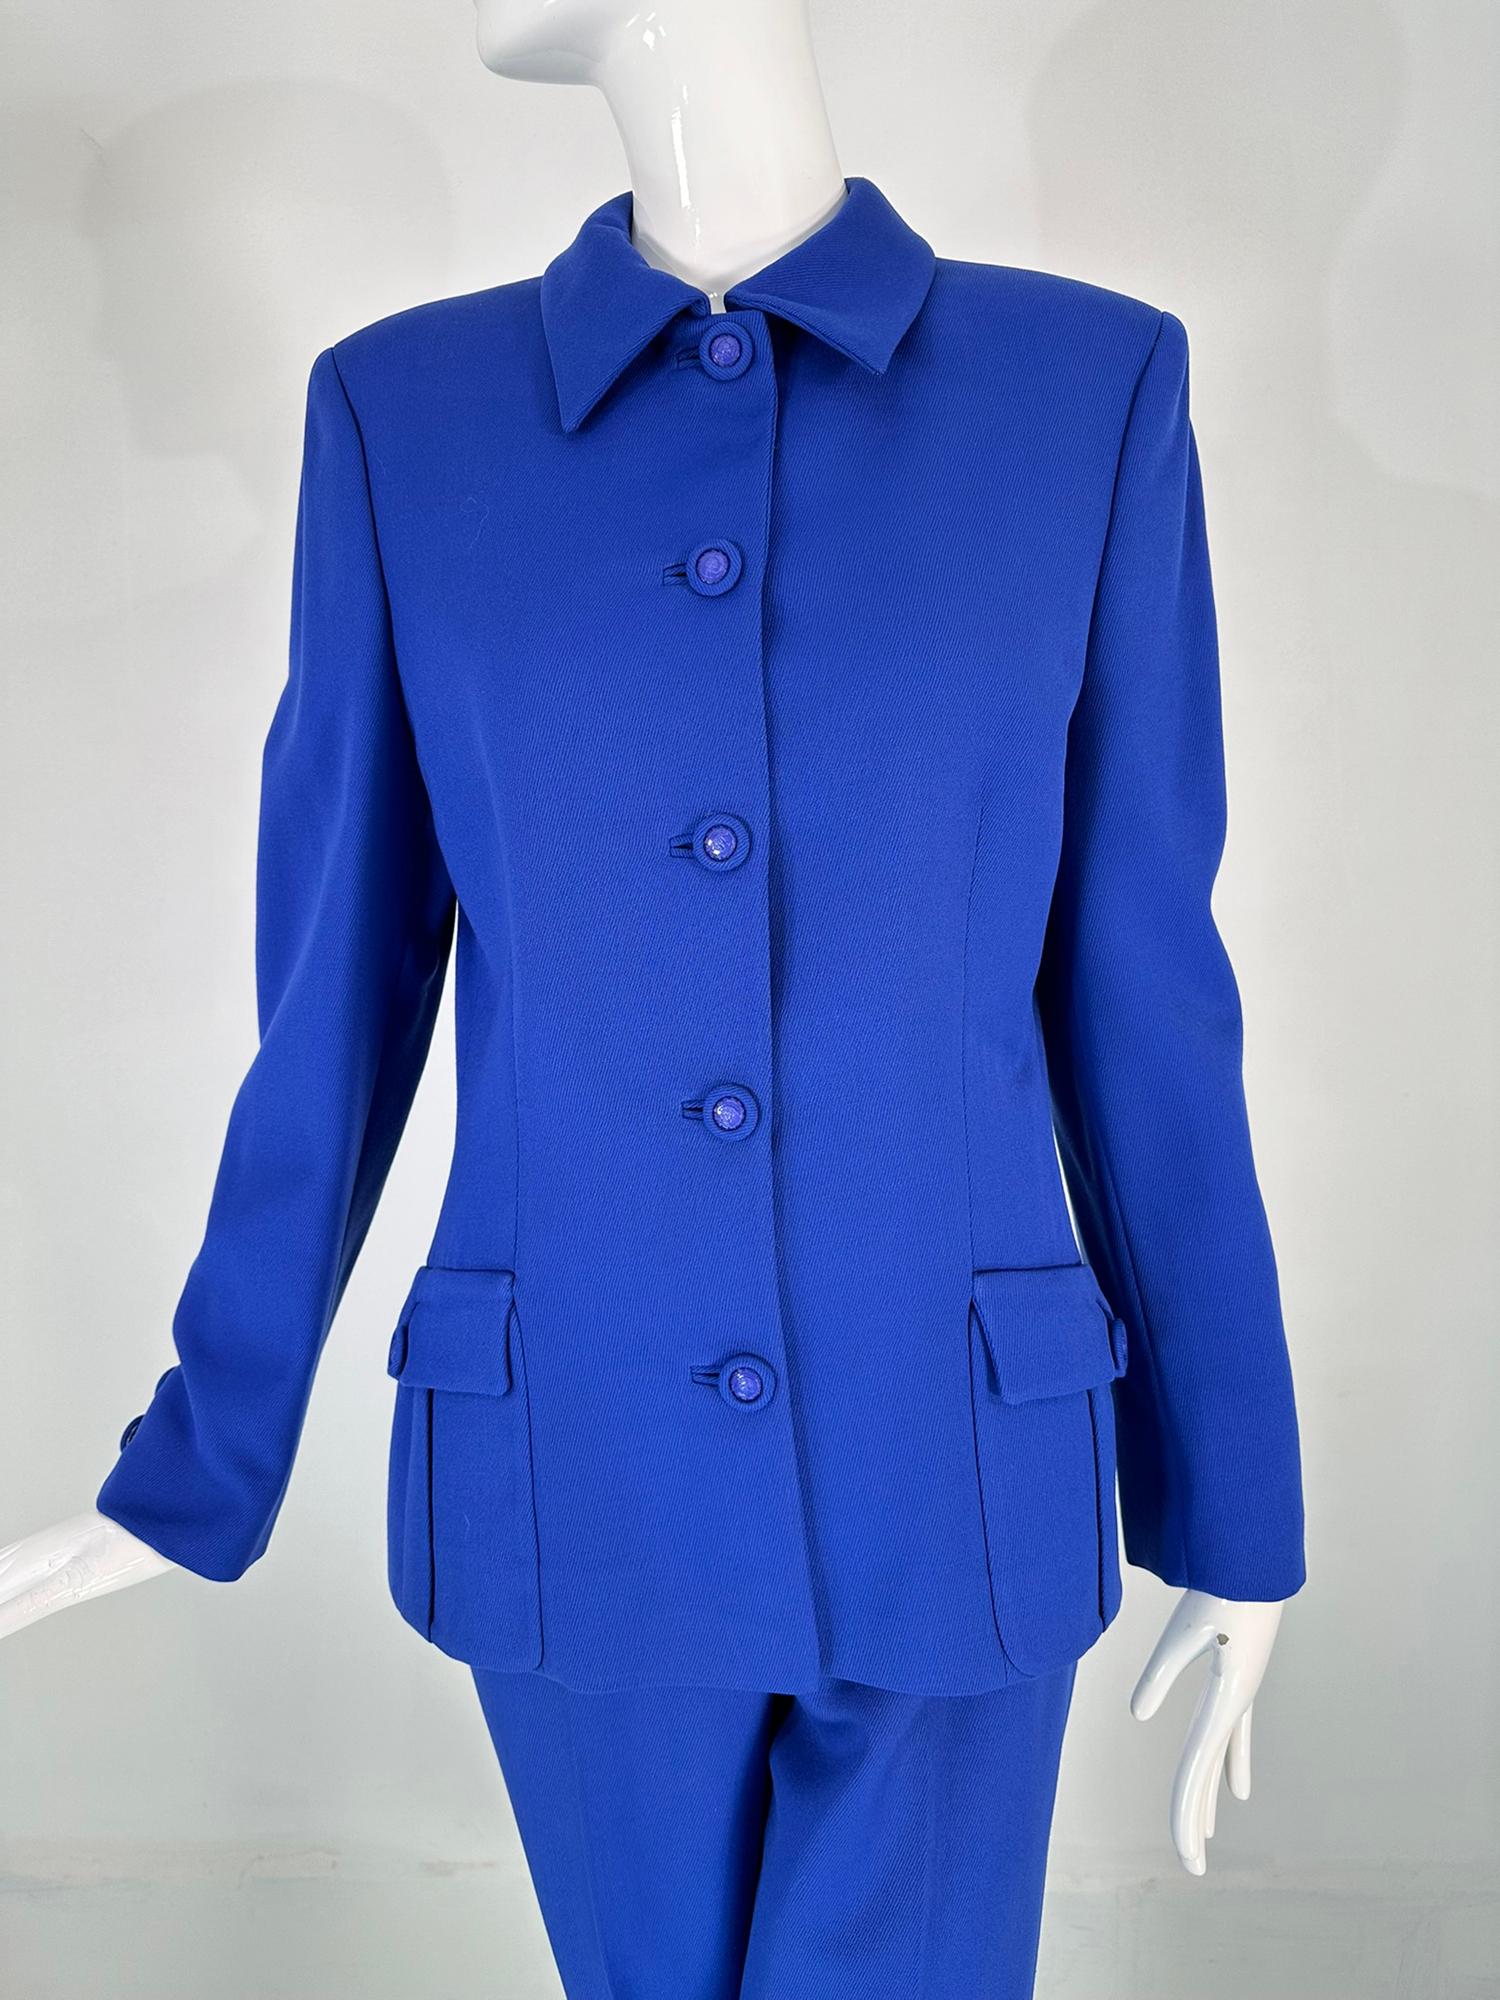 Gianni Versace Couture F/W 1995 Royal Blue Wool Pant Suit  For Sale 8